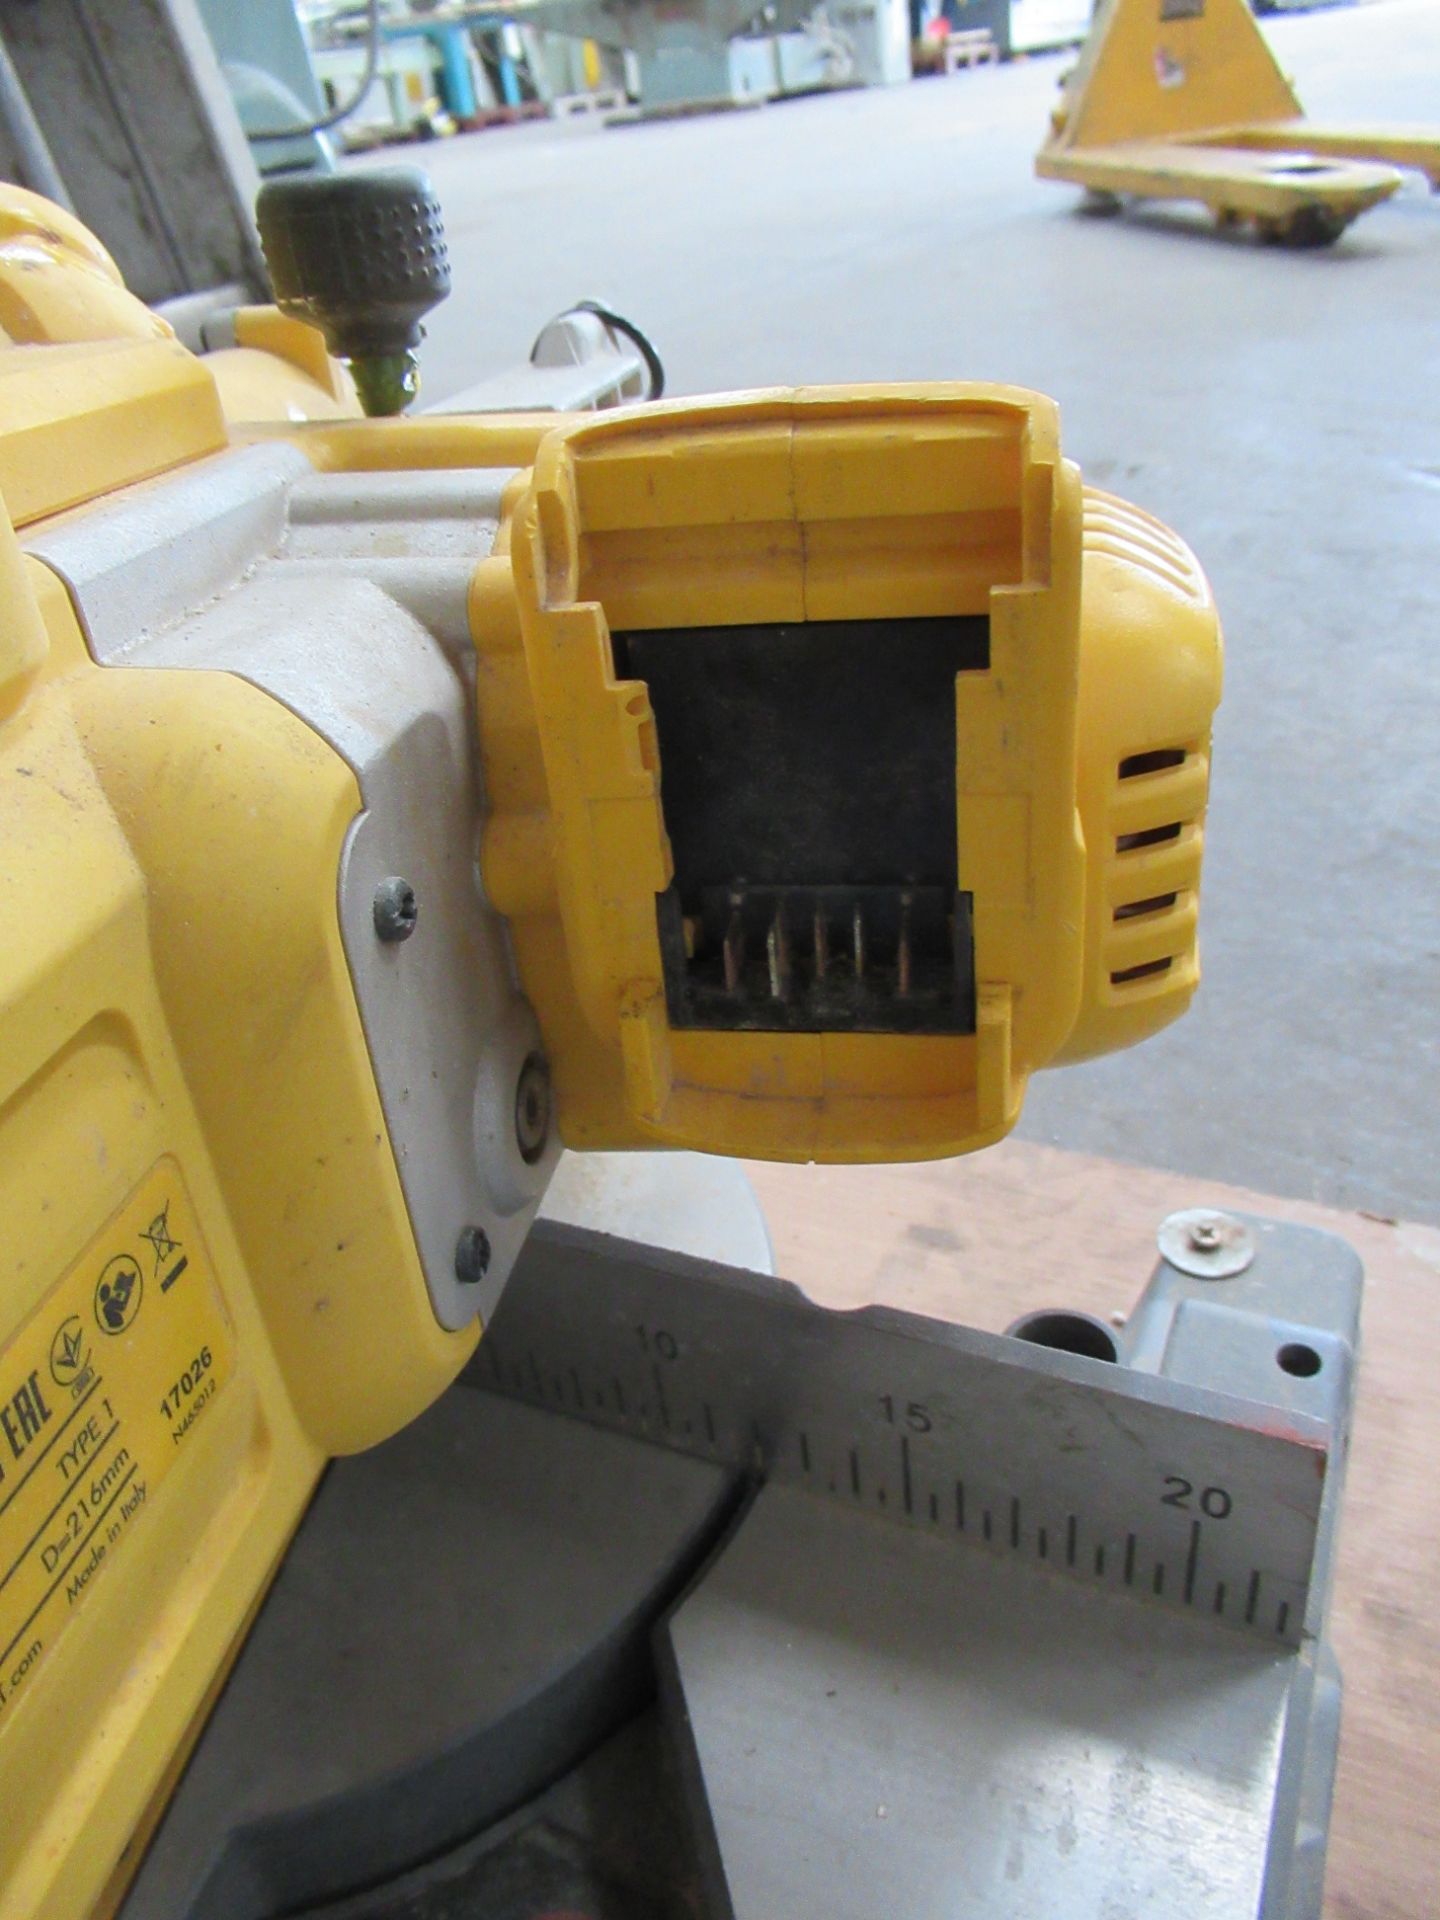 DeWalt DCS777 Battery Powered Mitre Saw - missing battery - Image 5 of 5